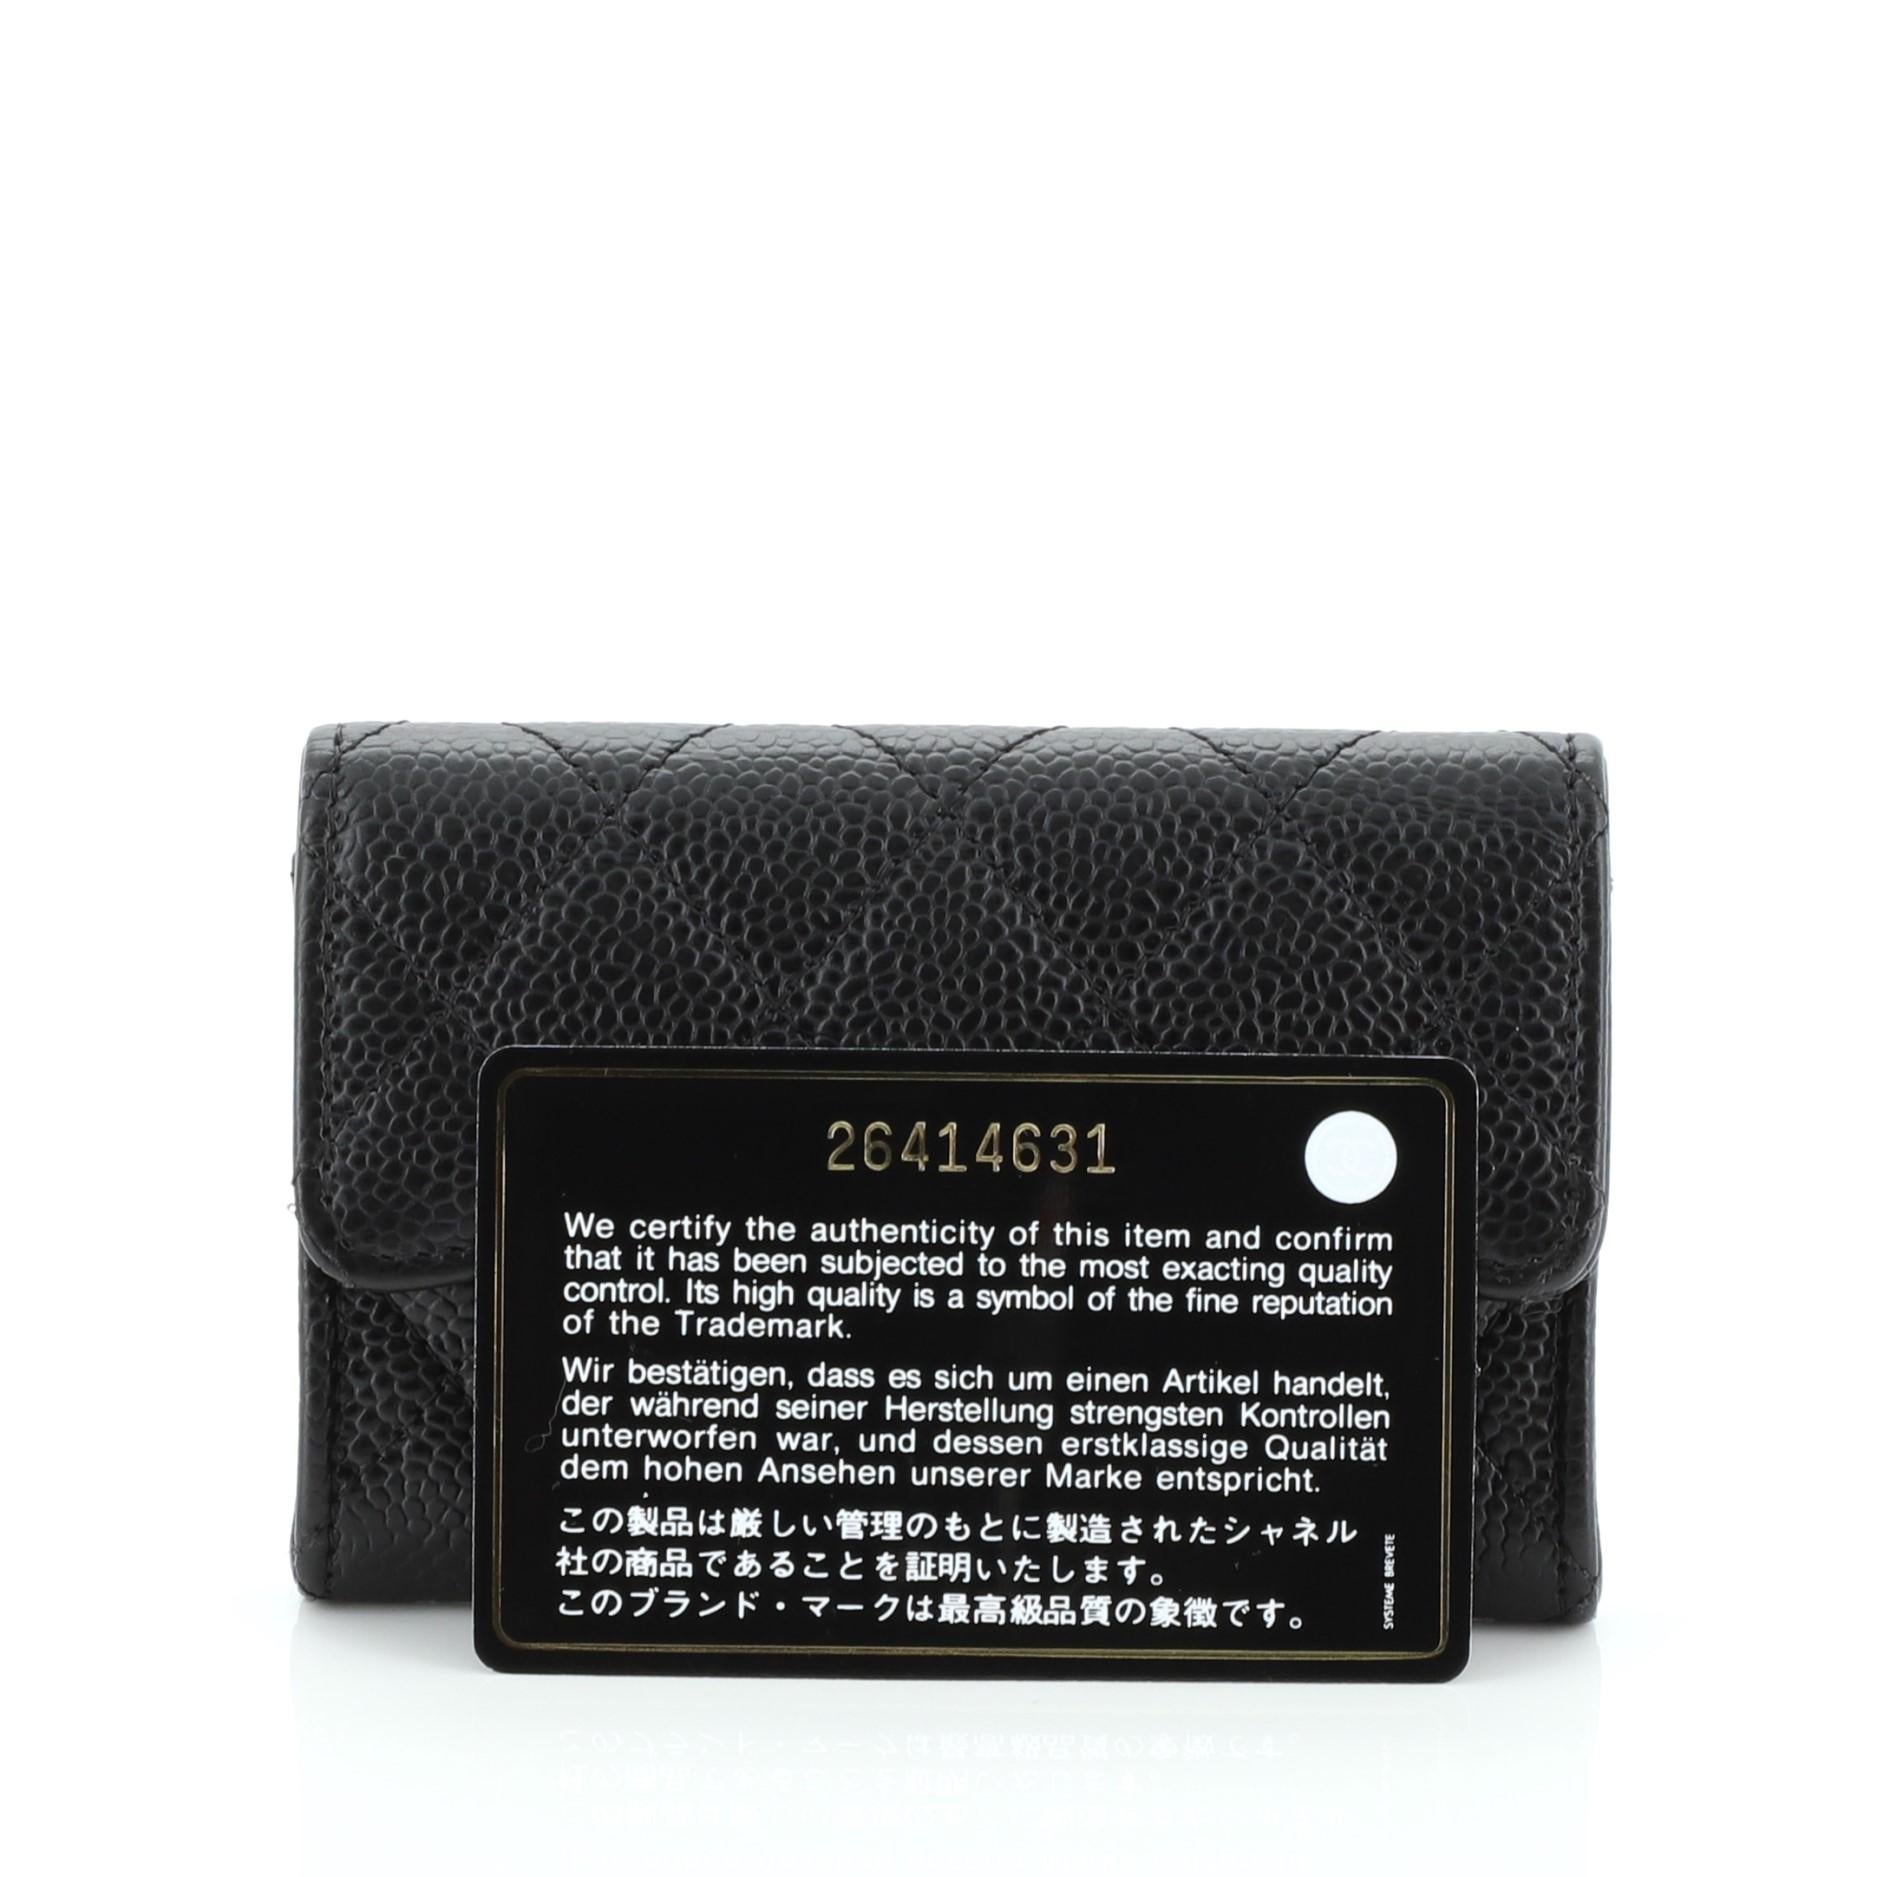 This Chanel Classic Flap Card Holder Quilted Caviar, crafted from black quilted caviar leather, features CC logo and silver-tone hardware. It opens to a black and red fabric interior. Hologram sticker reads: 26414631.

Condition: Excellent.